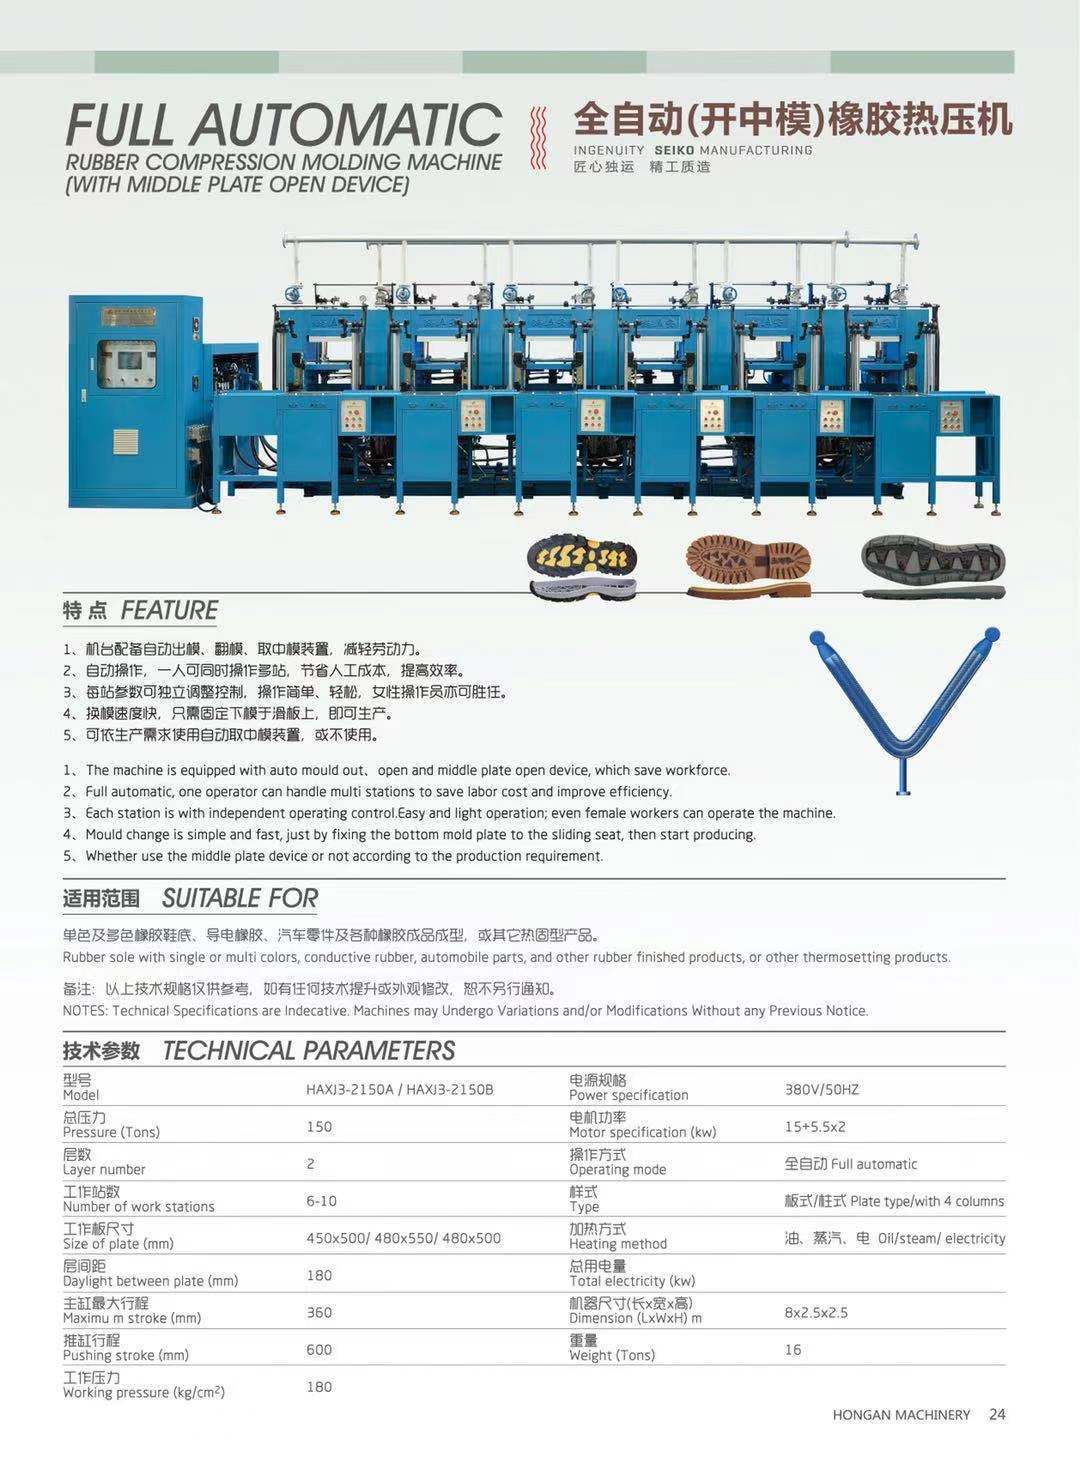 Fully automatic rubber sole compression molding machine (with middle plate open device)